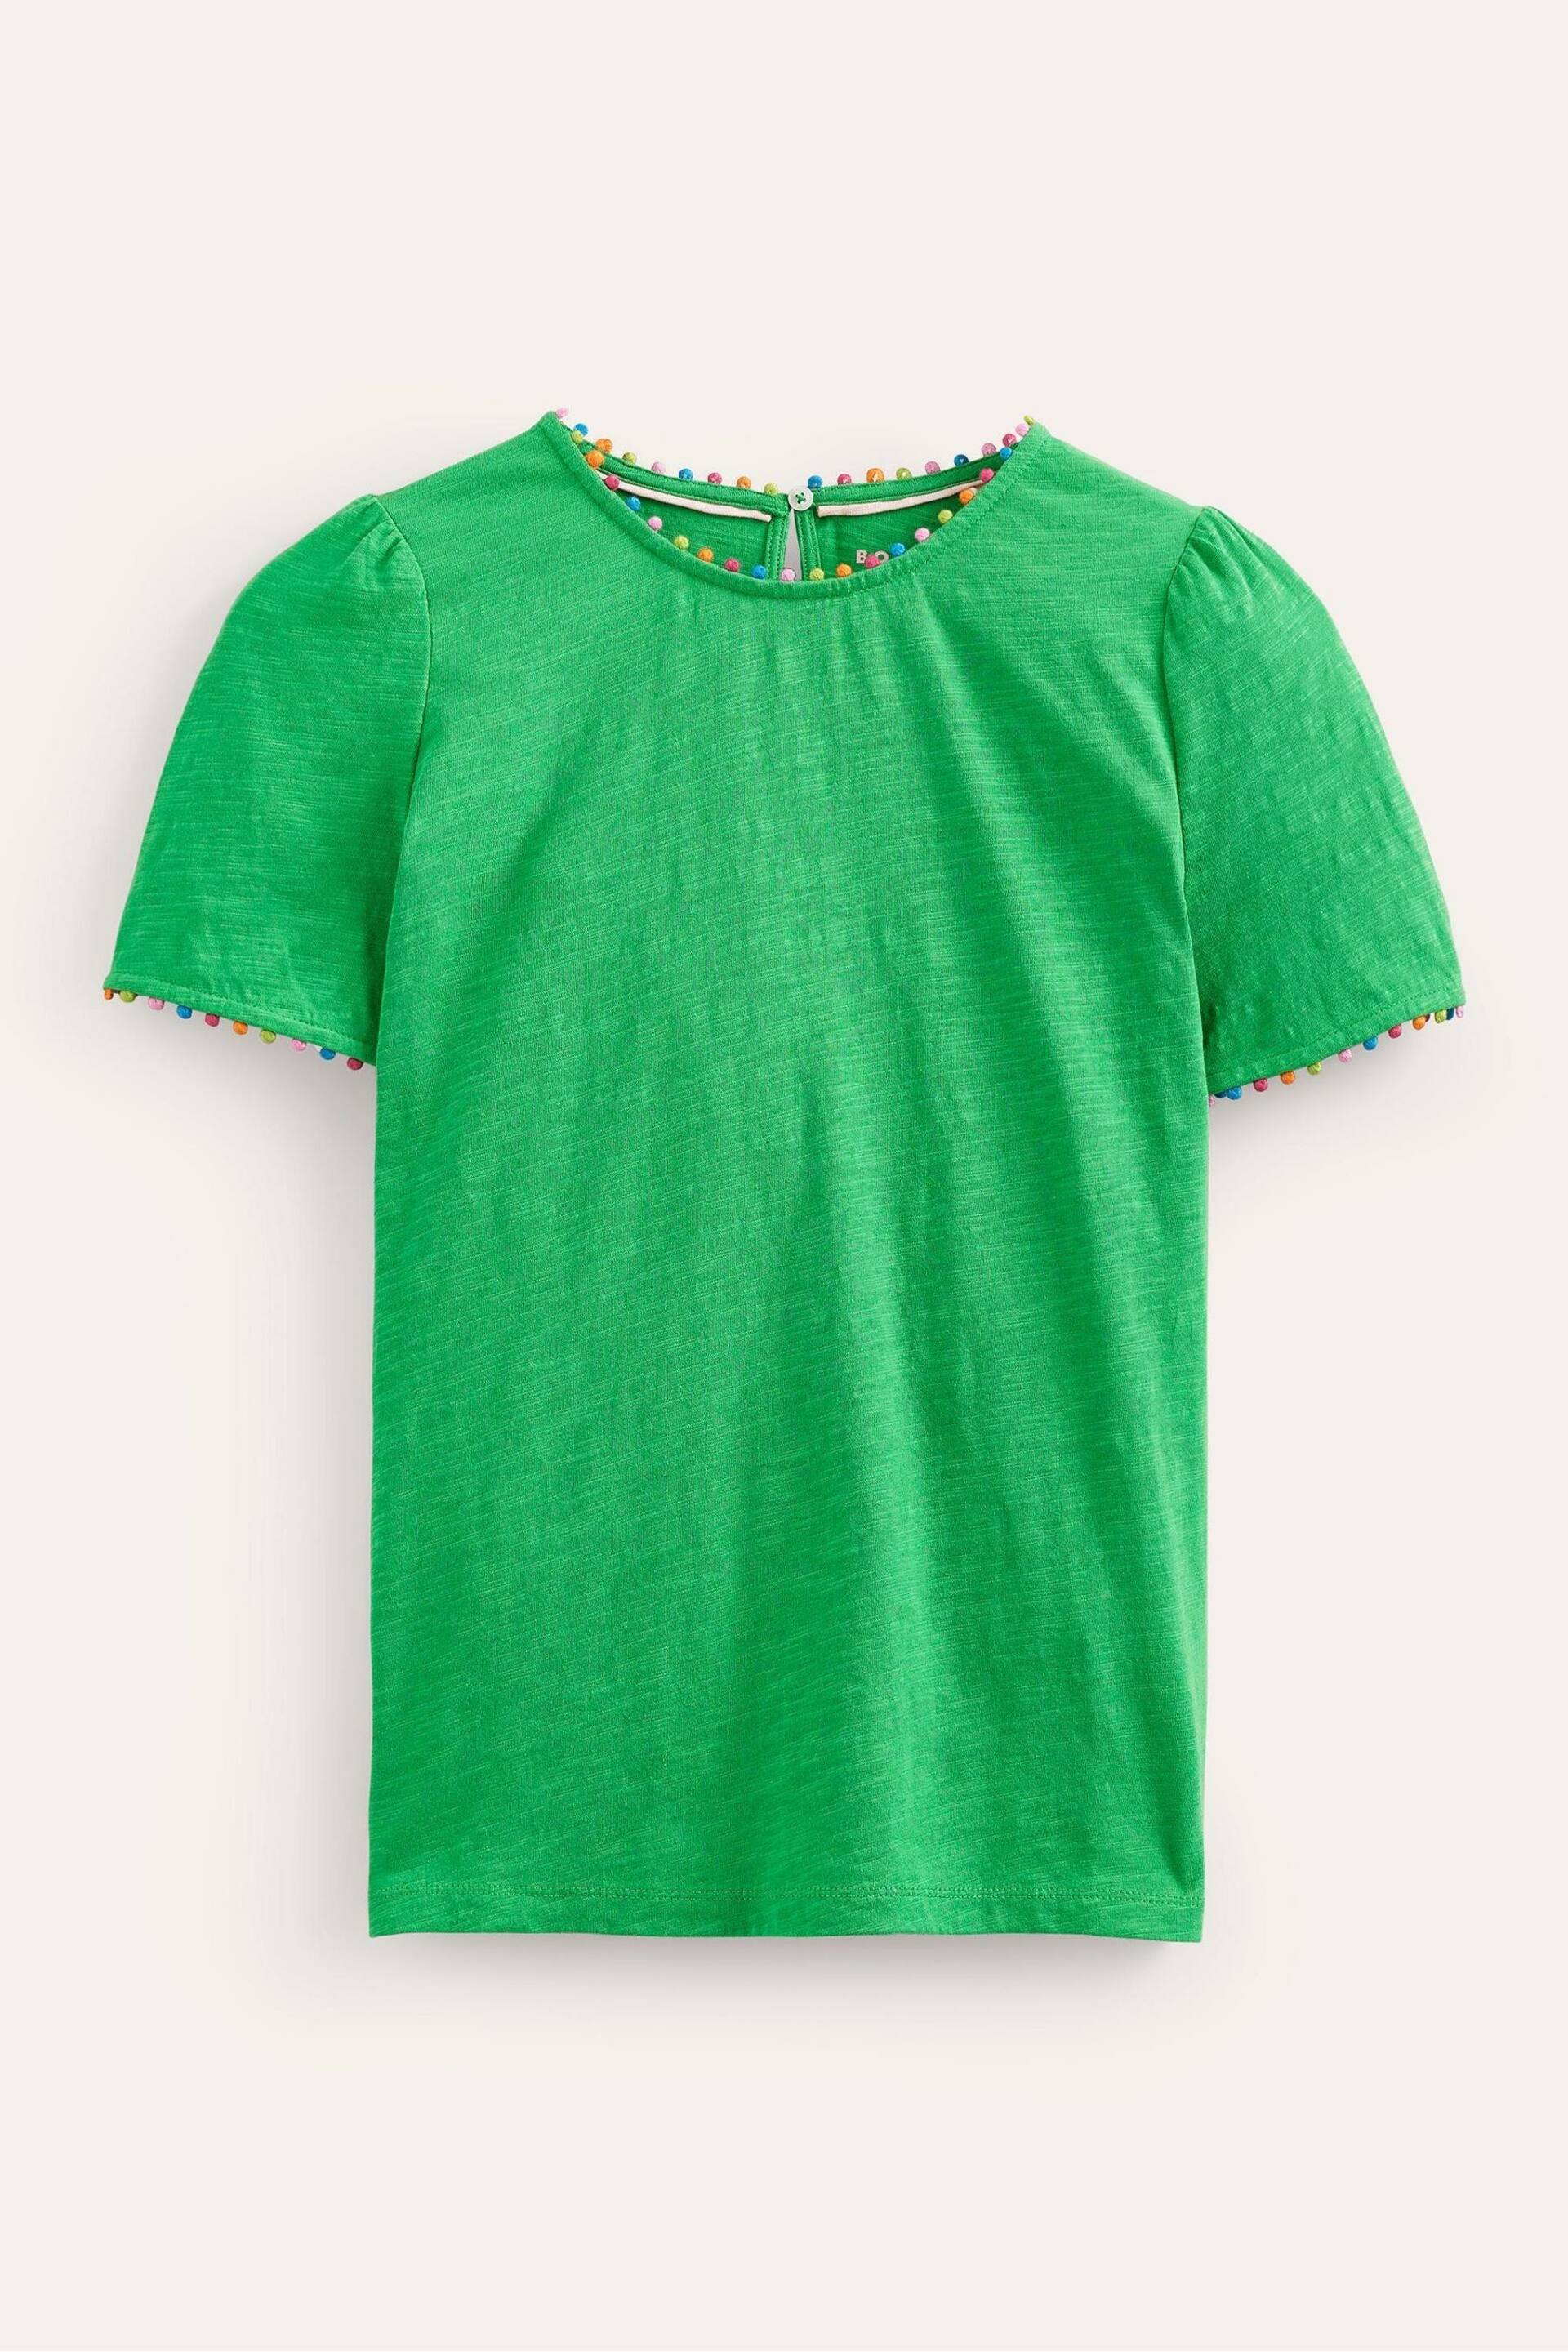 Boden Green Ali Jersey Blouses - Image 5 of 5